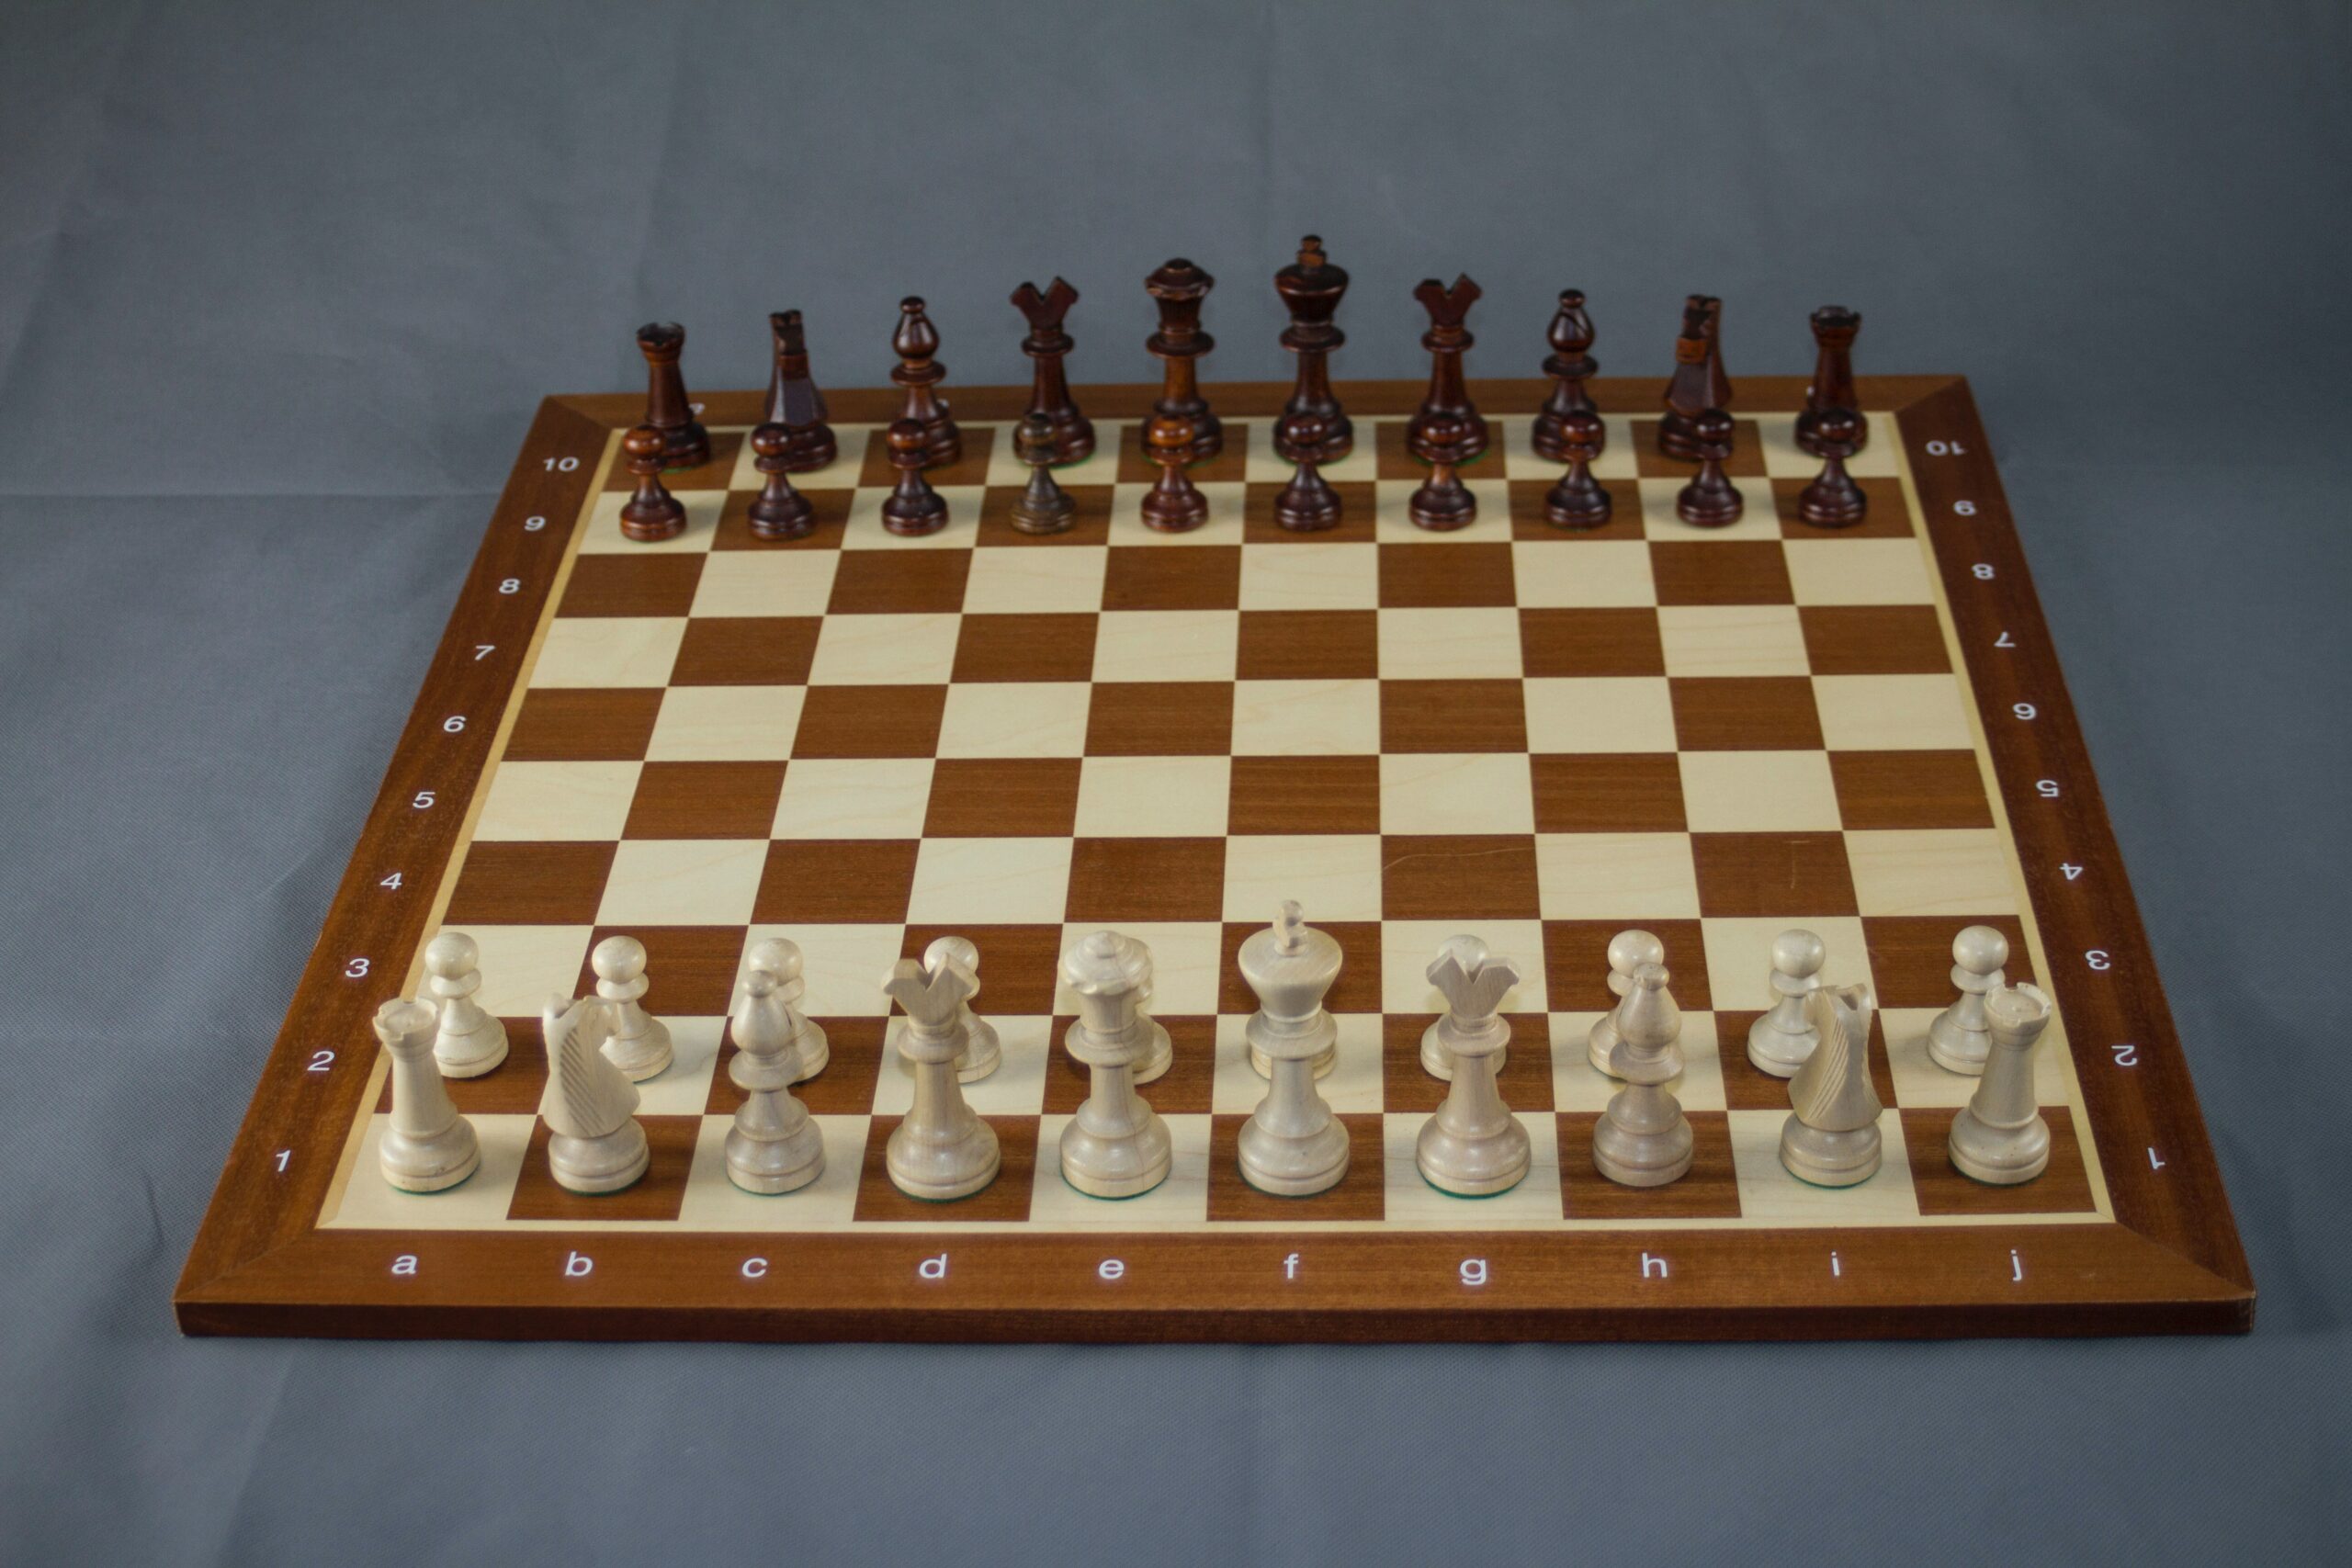 the standard chessboard is an 8x8 grid